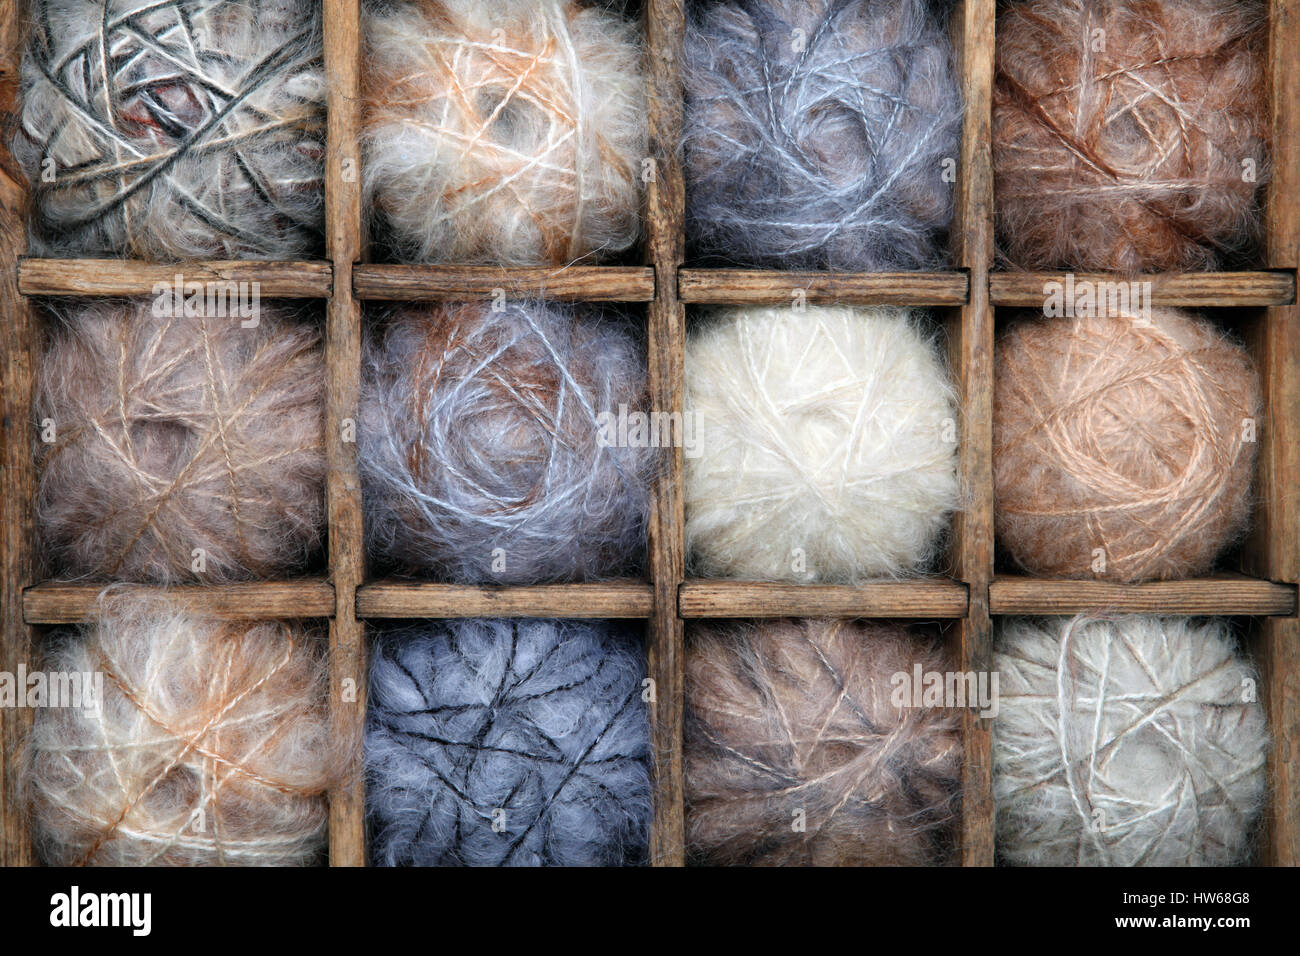 Image of colorful wool and mohair yarn collection. Stock Photo